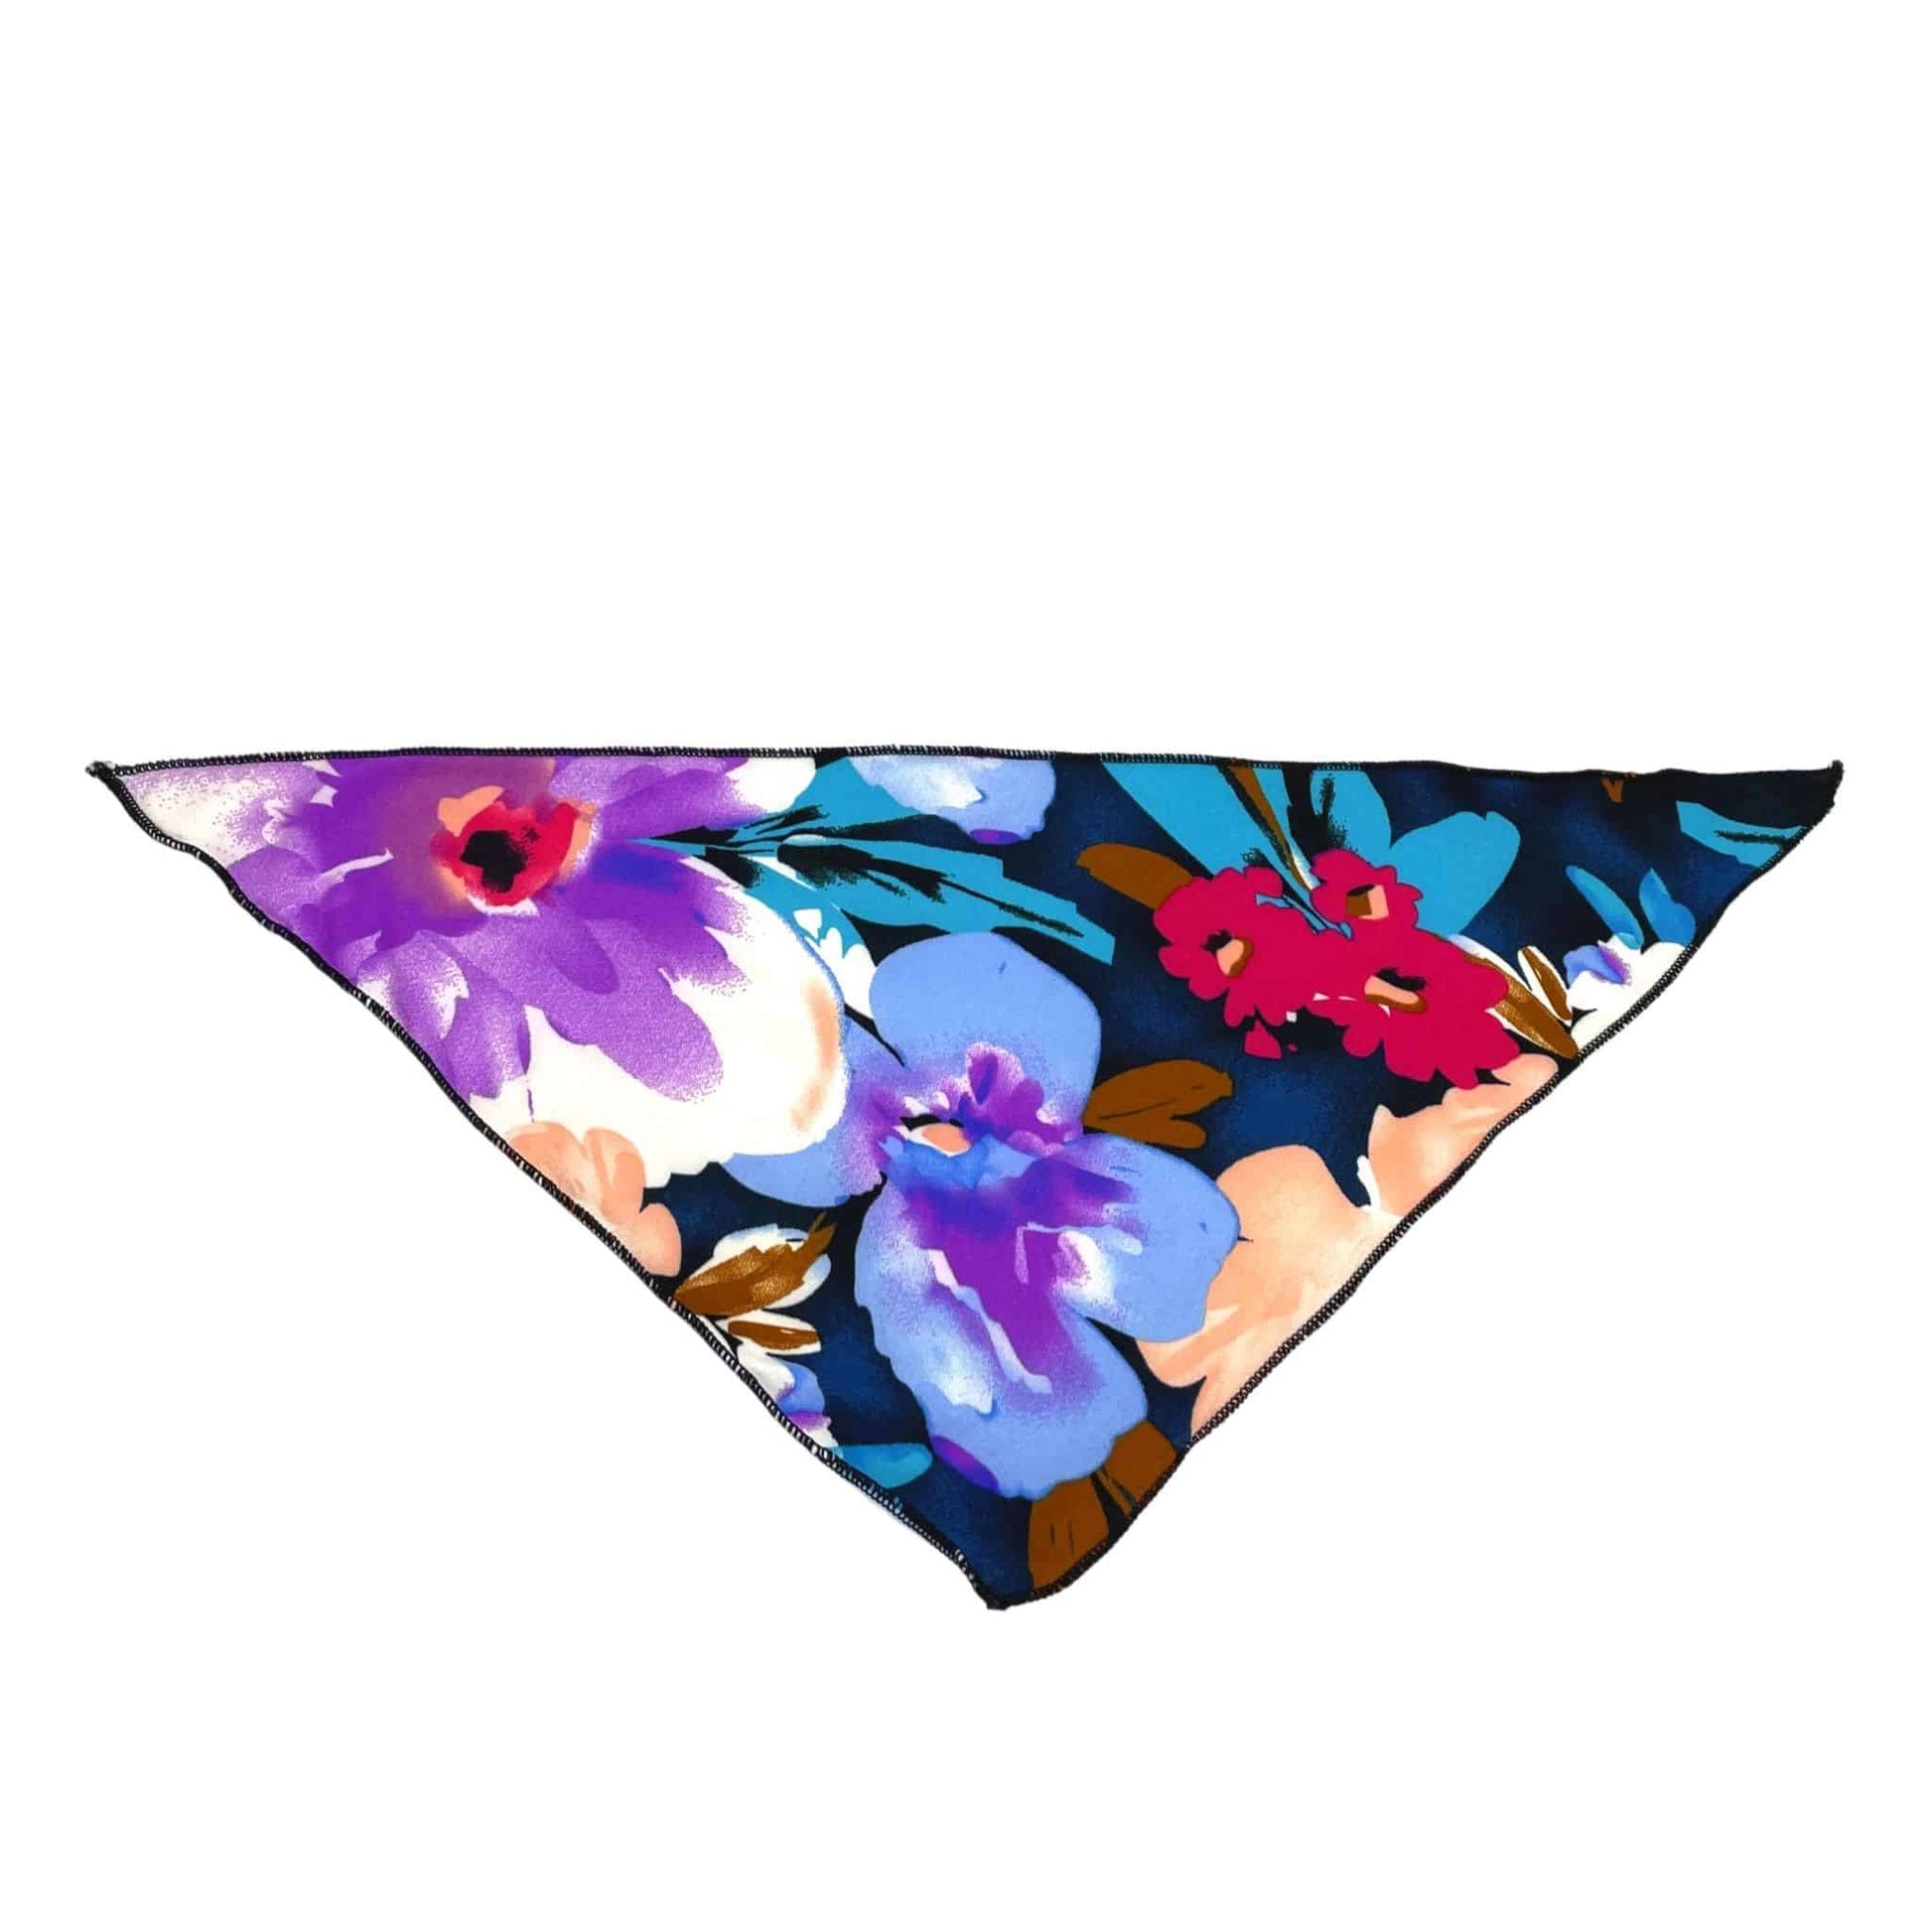 Triangle bandana made of stretchy knit polyester, printed with tropical navy floral pattern.